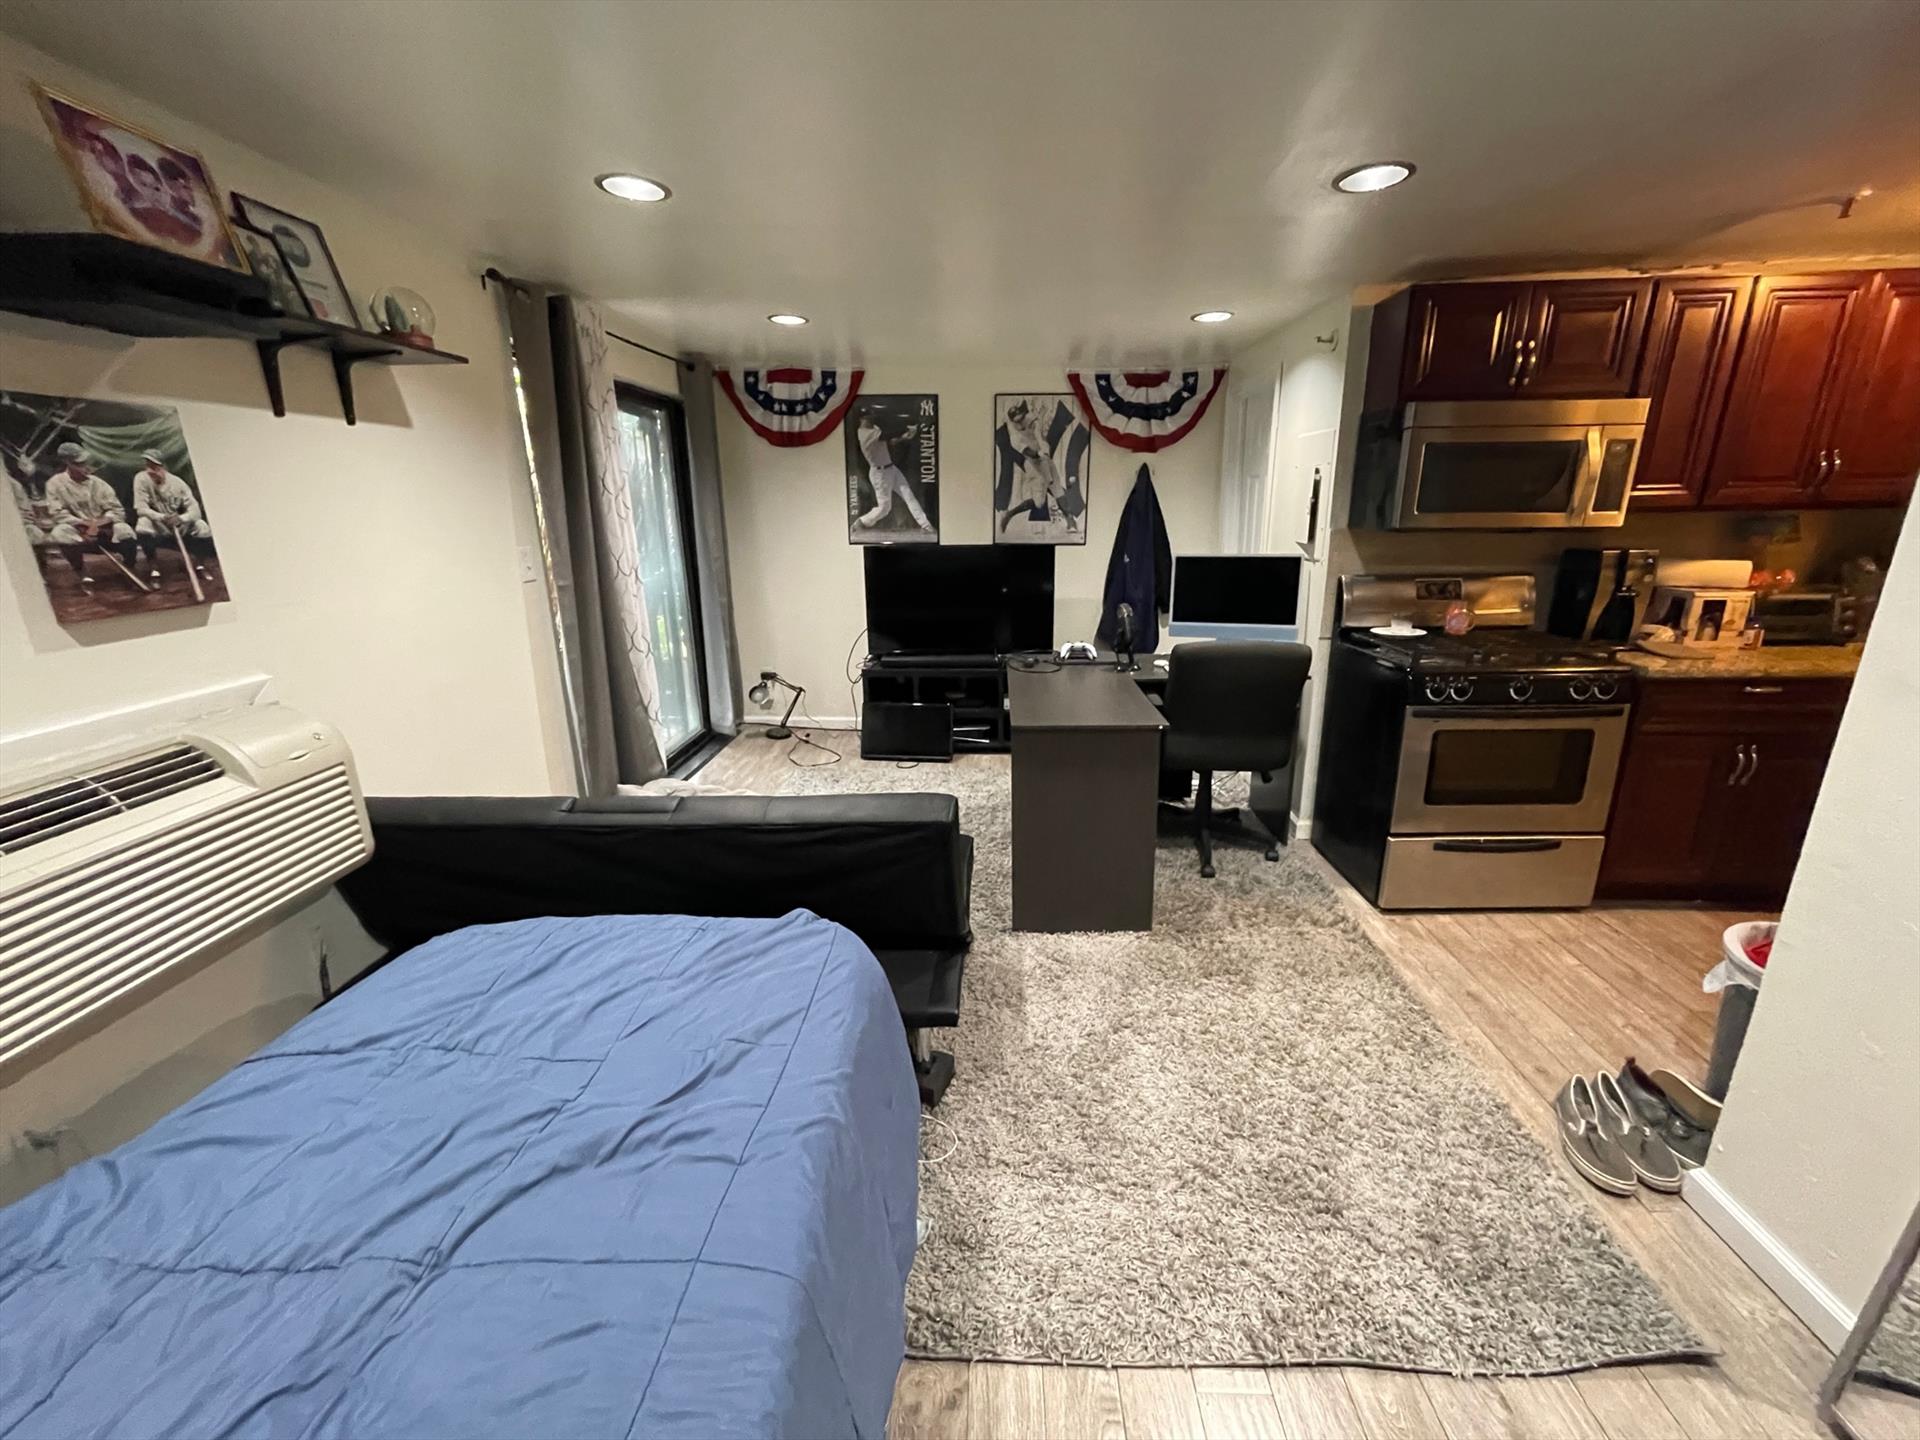 Recently renovated studio in Hoboken! Unit features updated kitchen with stainless steel appliances, hardwood floors, and a private patio that leads to a shared yard! Available 8/1. One month broker fee.